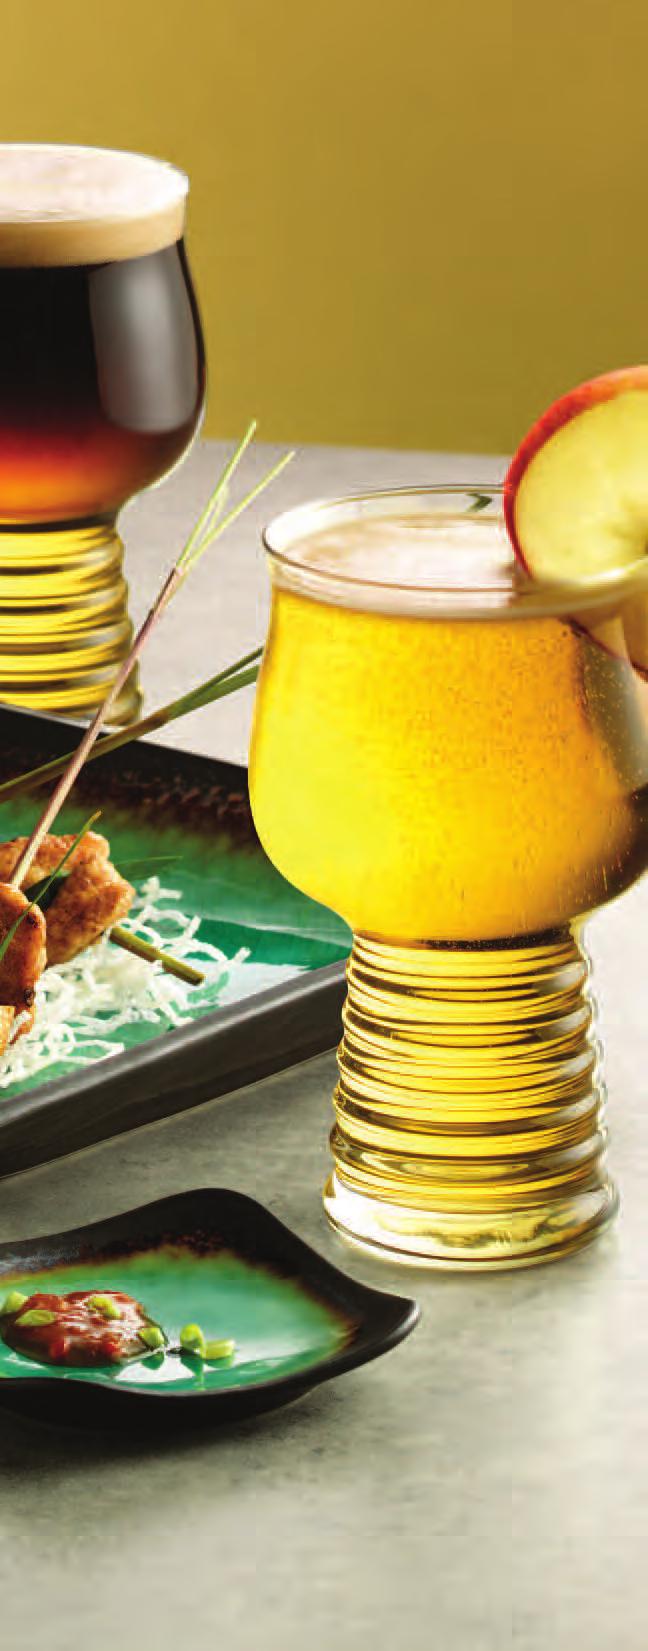 Hard Cider is anything but soft Our innovative Hard Cider glass